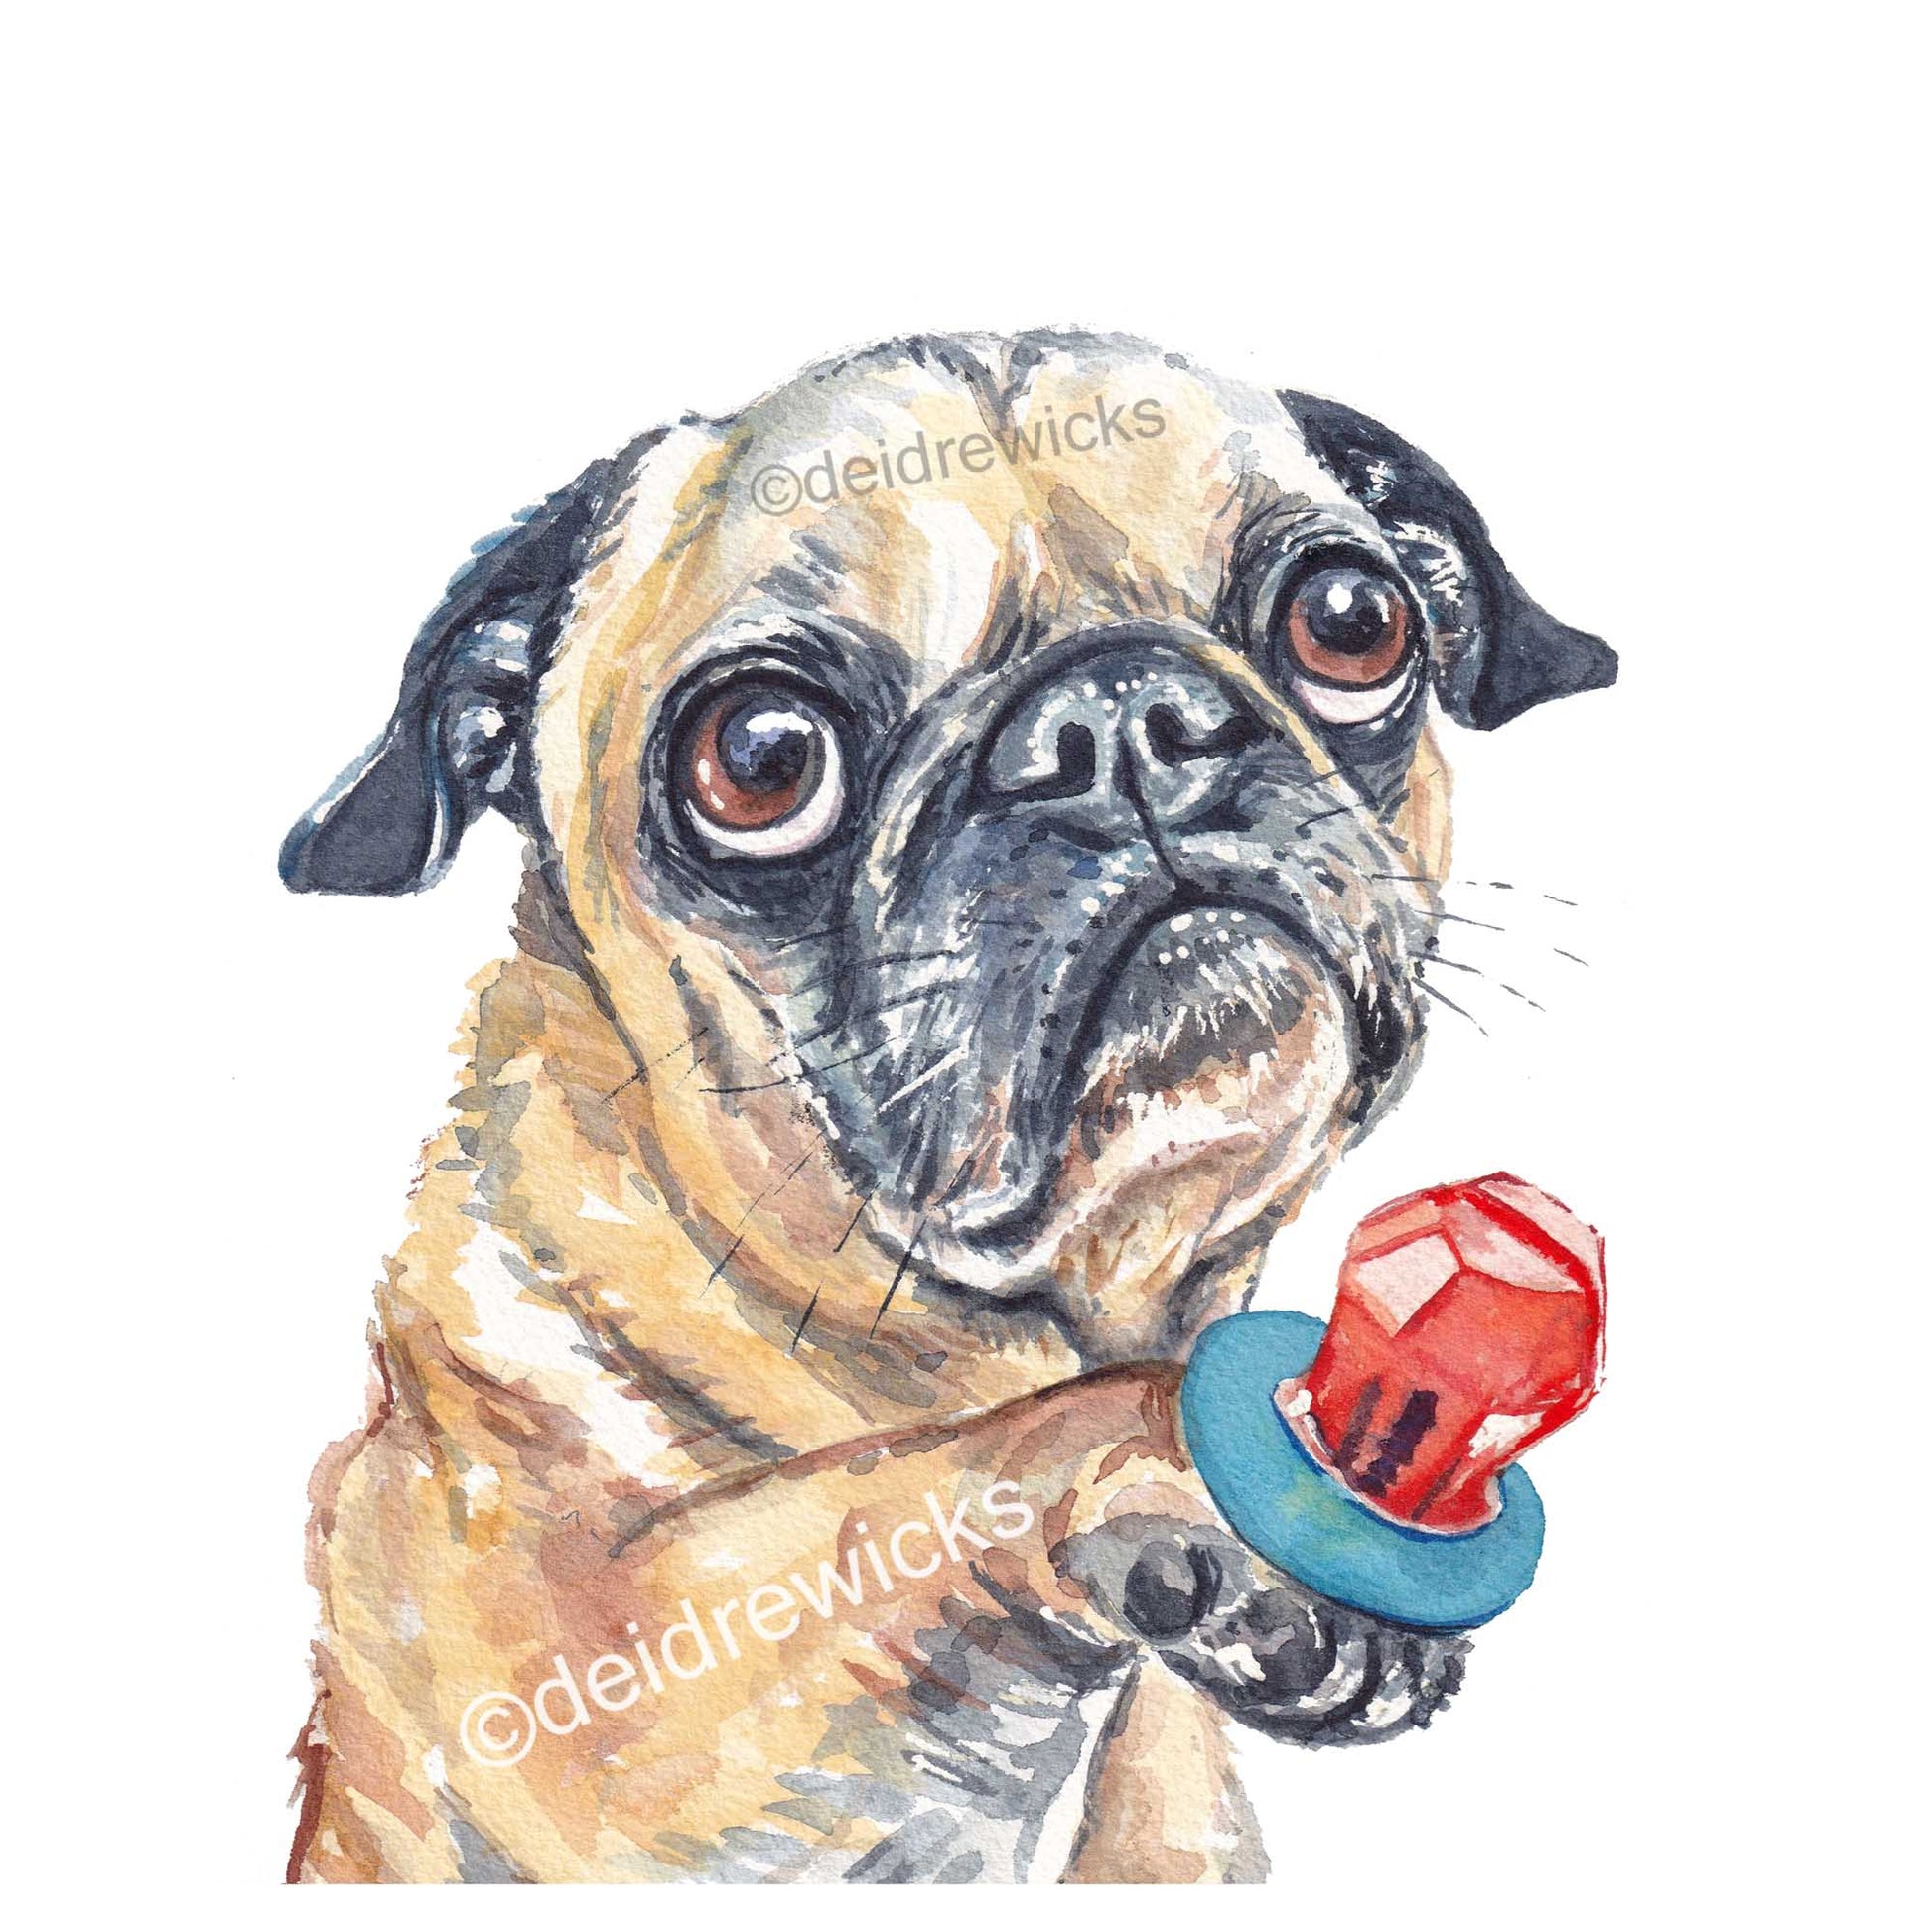 Watercolour painting of a pug dog offering a lick of his candy ring lollipop. Art by Deidre Wicks